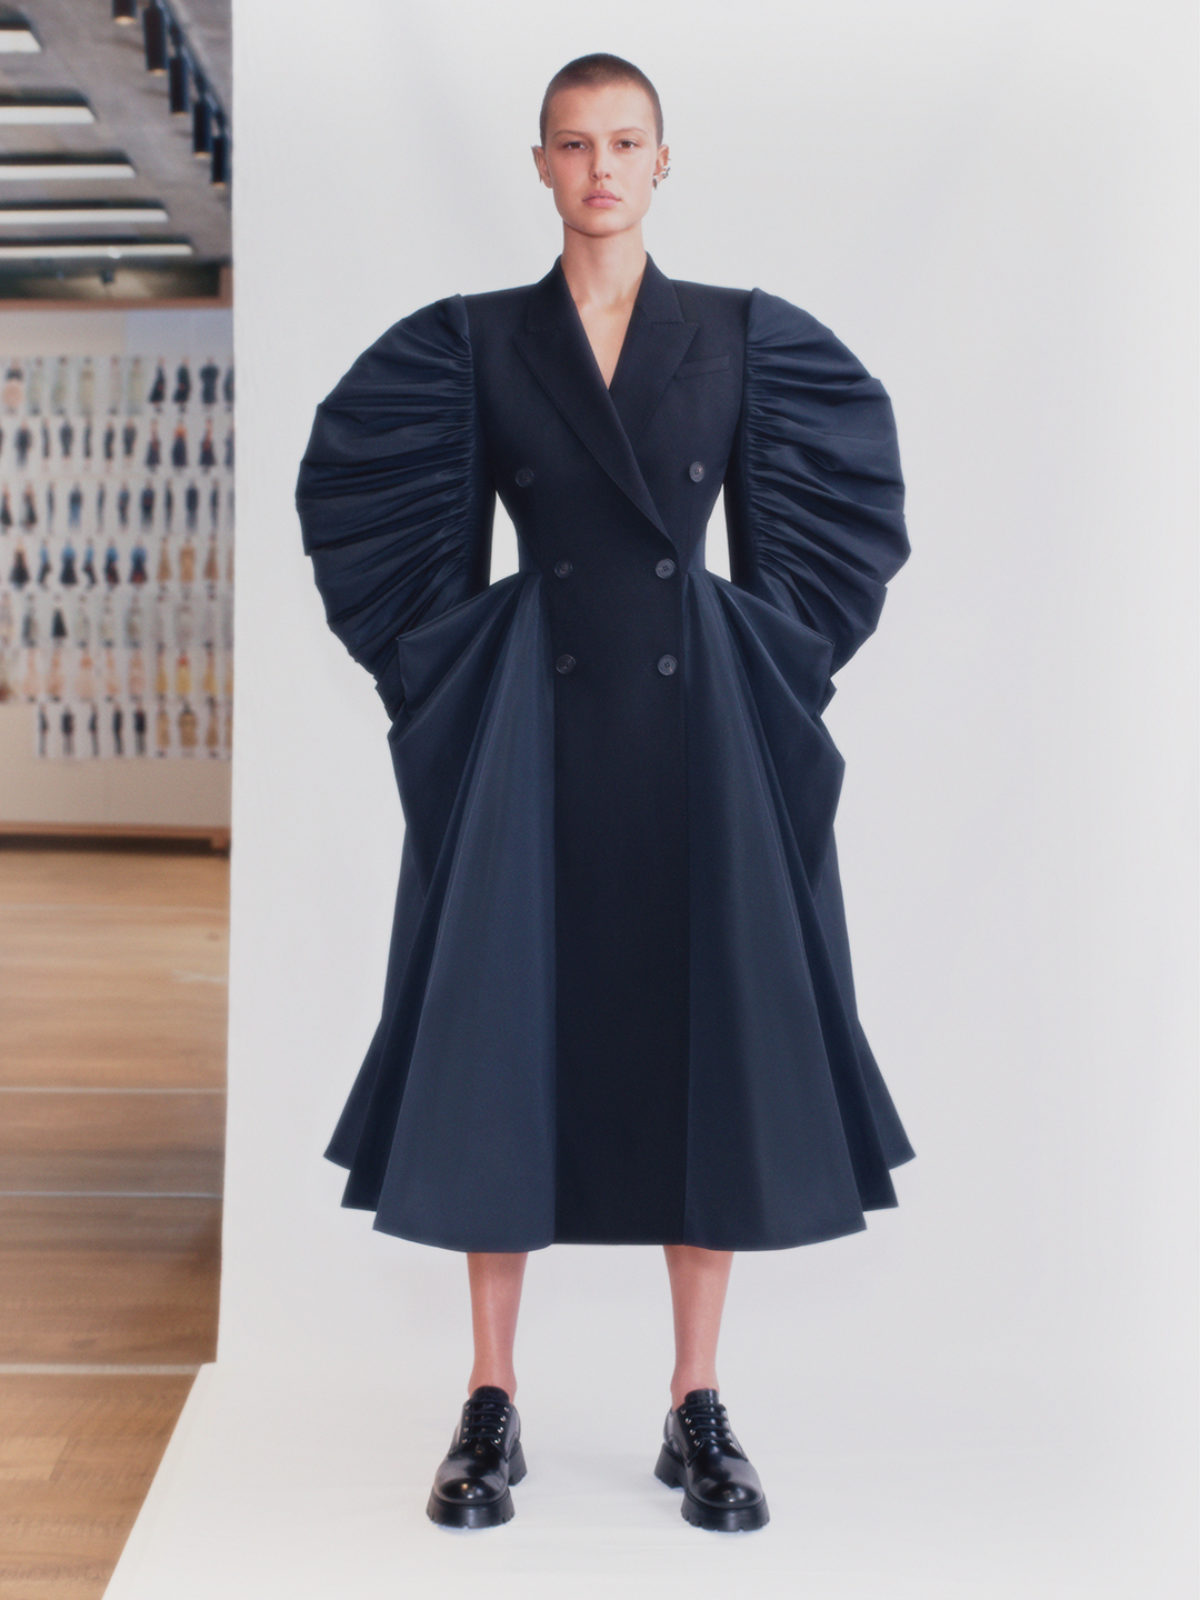 Silhouette In Focus Of Alexander McQueen's Spring/Summer 2021 Womenswear Collection